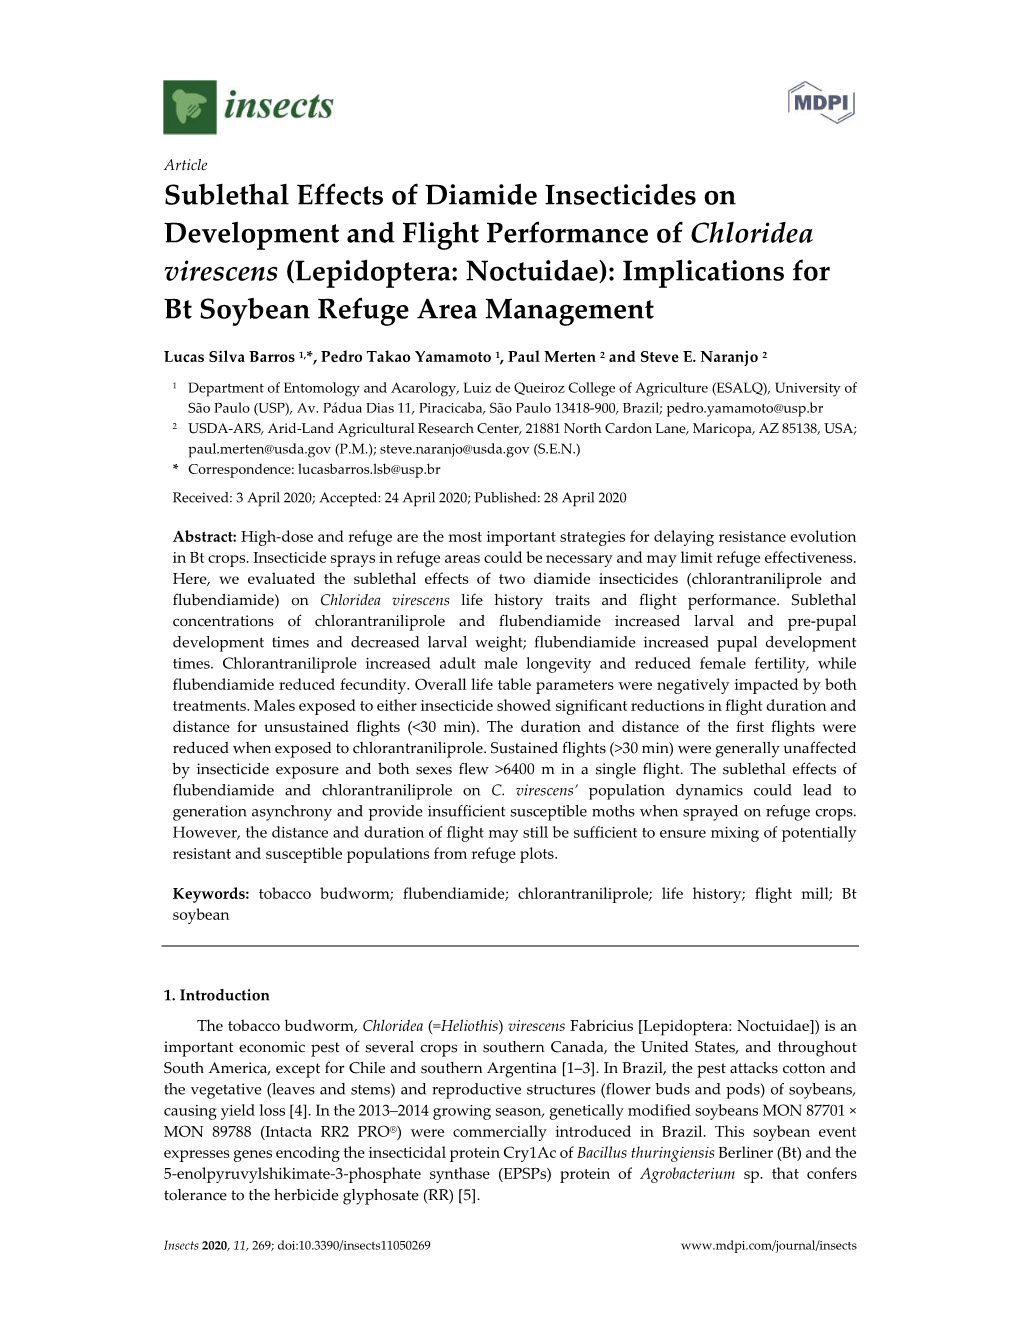 Sublethal Effects of Diamide Insecticides On